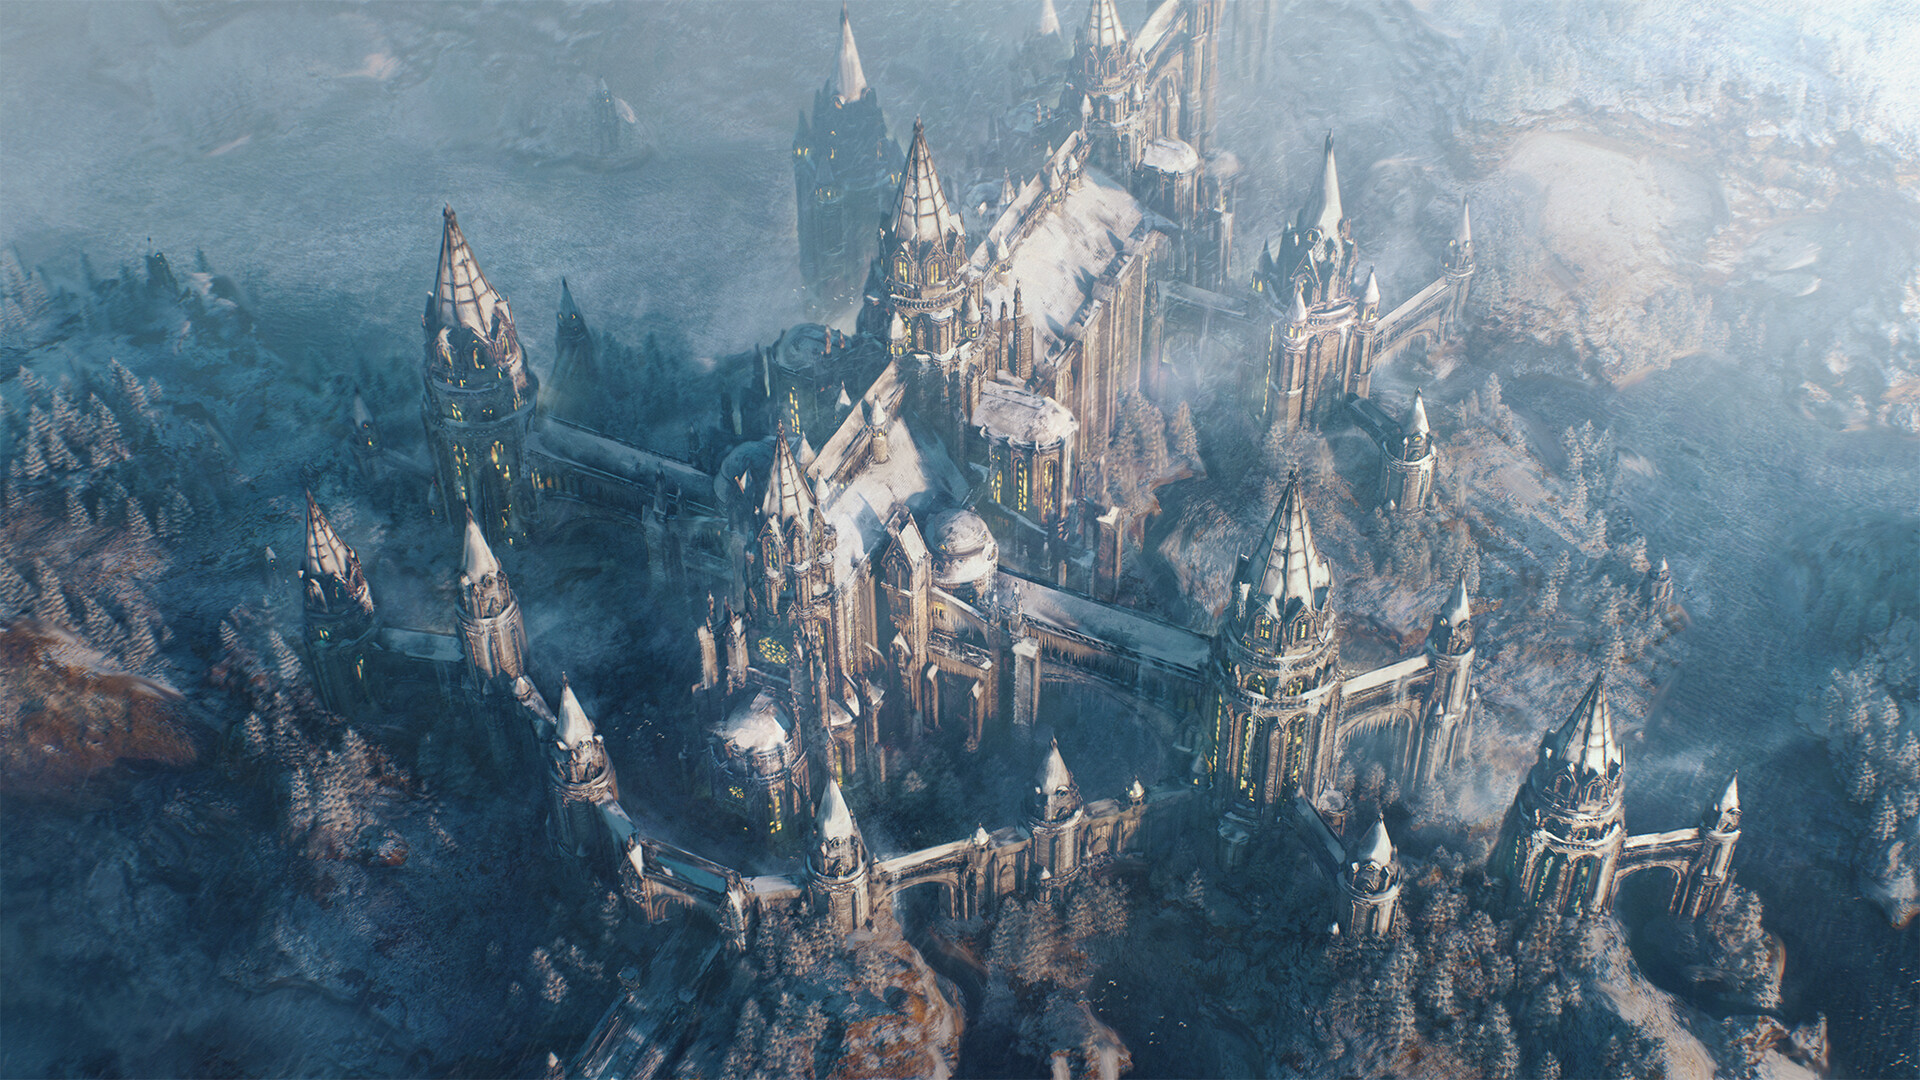 General 1920x1080 Oliver Beck digital art fantasy art castle snow trees Western Architecture gothic architecture